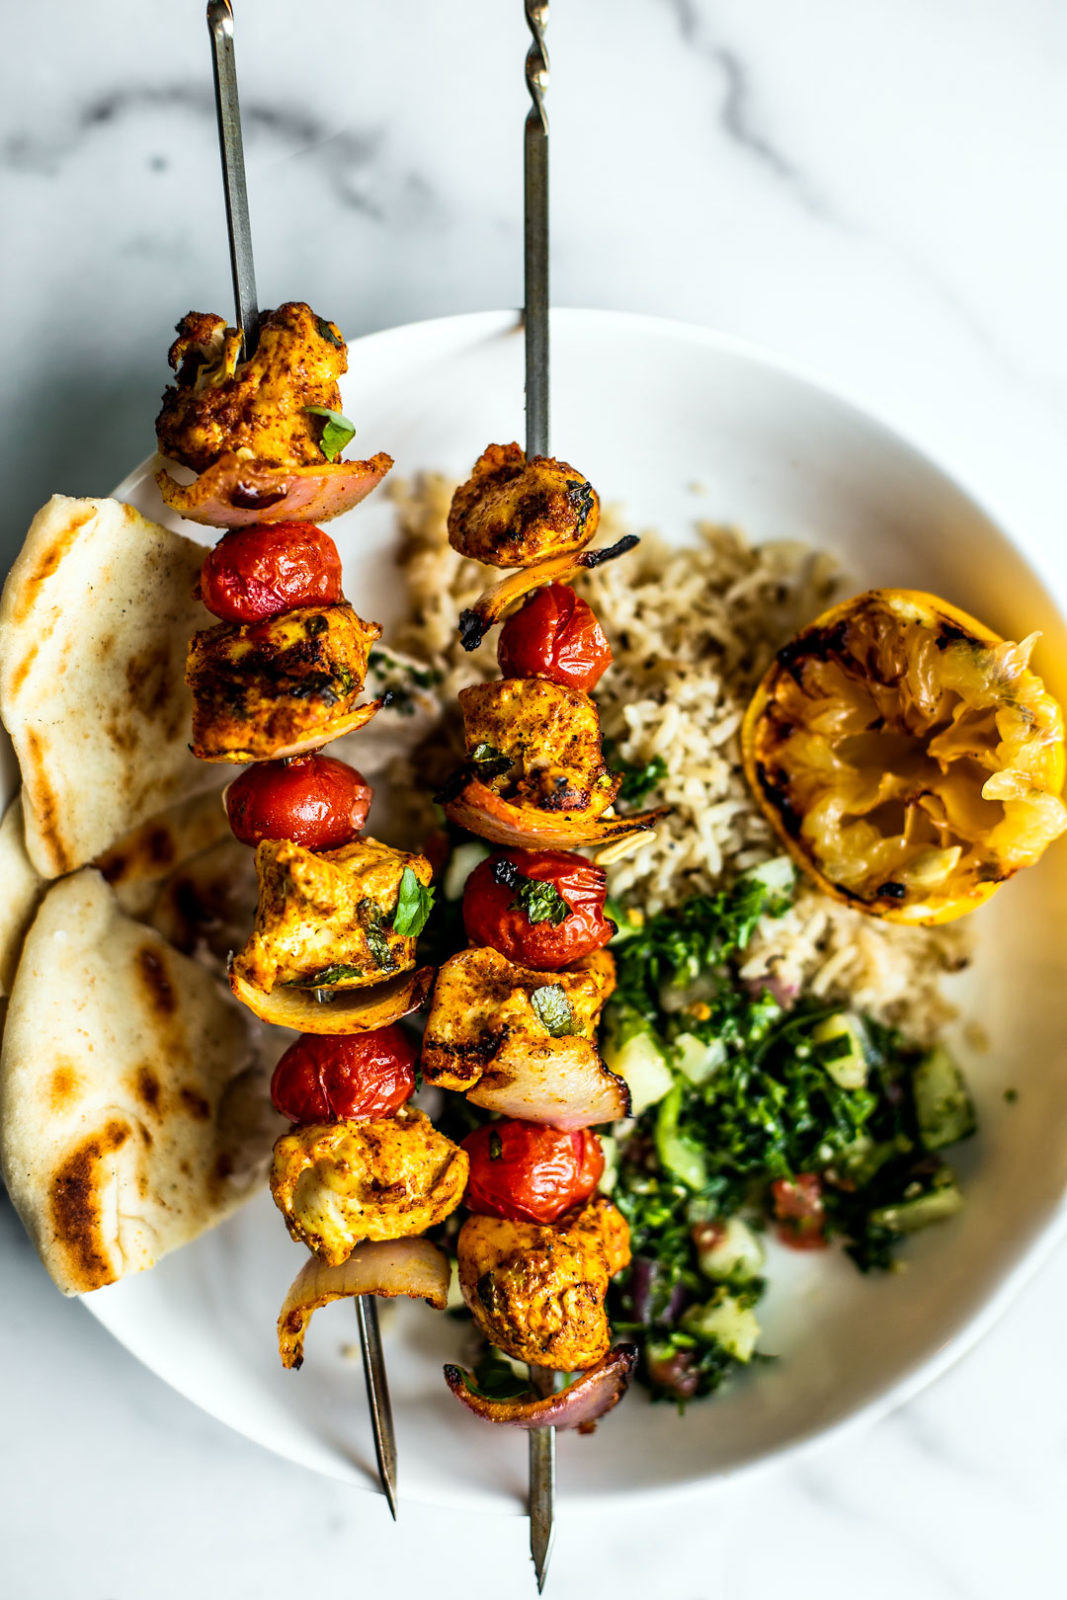 Plate of rice, tabbouleh, and pitas with grilled Moroccan chicken skewers on top.